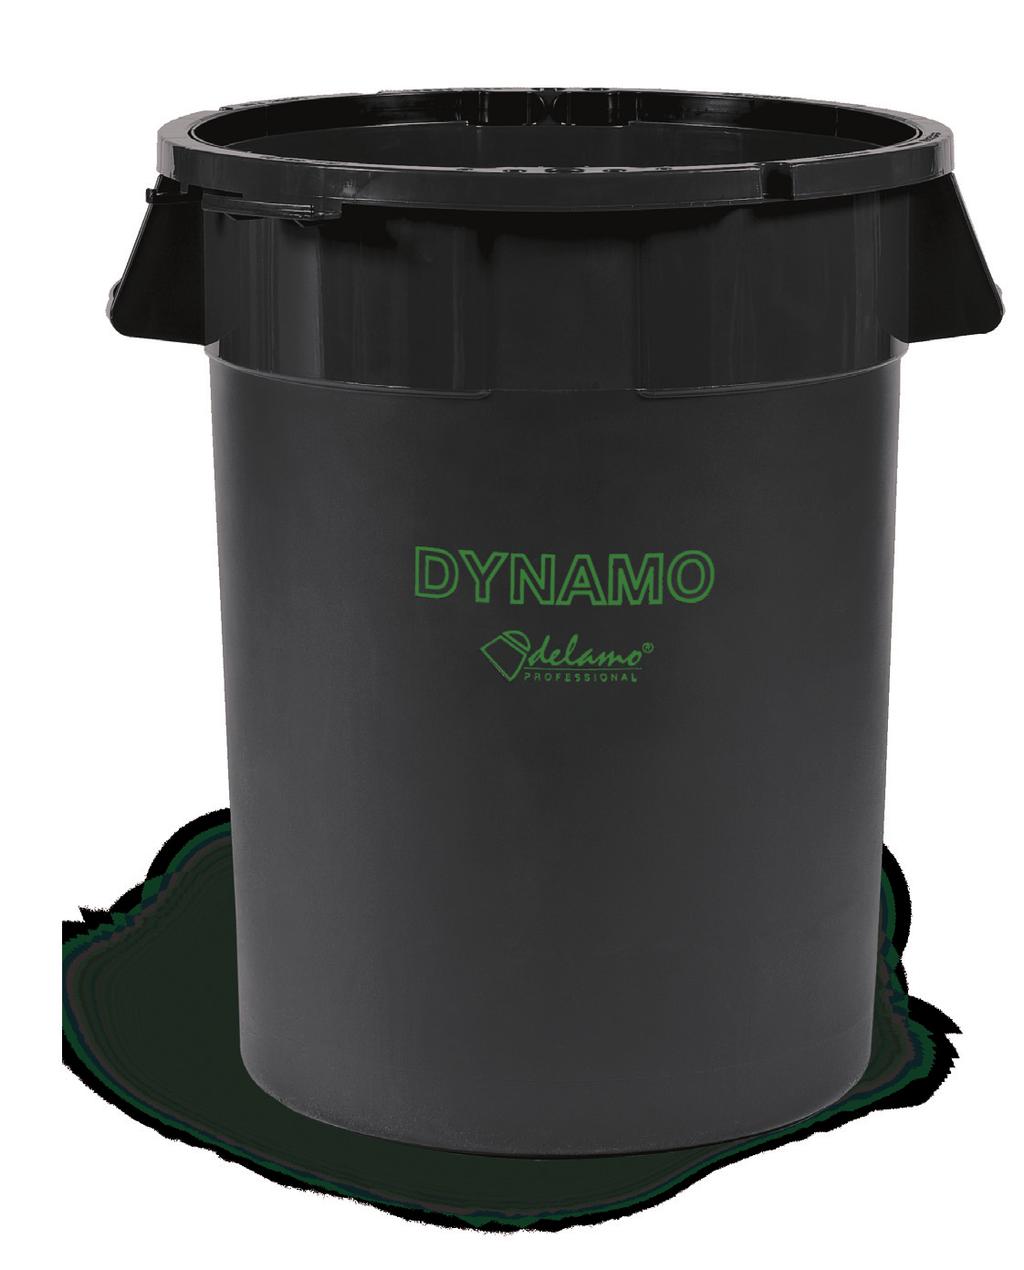 dynamo utility cans 32 & 44-Gal DYNAMO Utility Can The Dynamo 32 & 44-gallon utility can are the first with